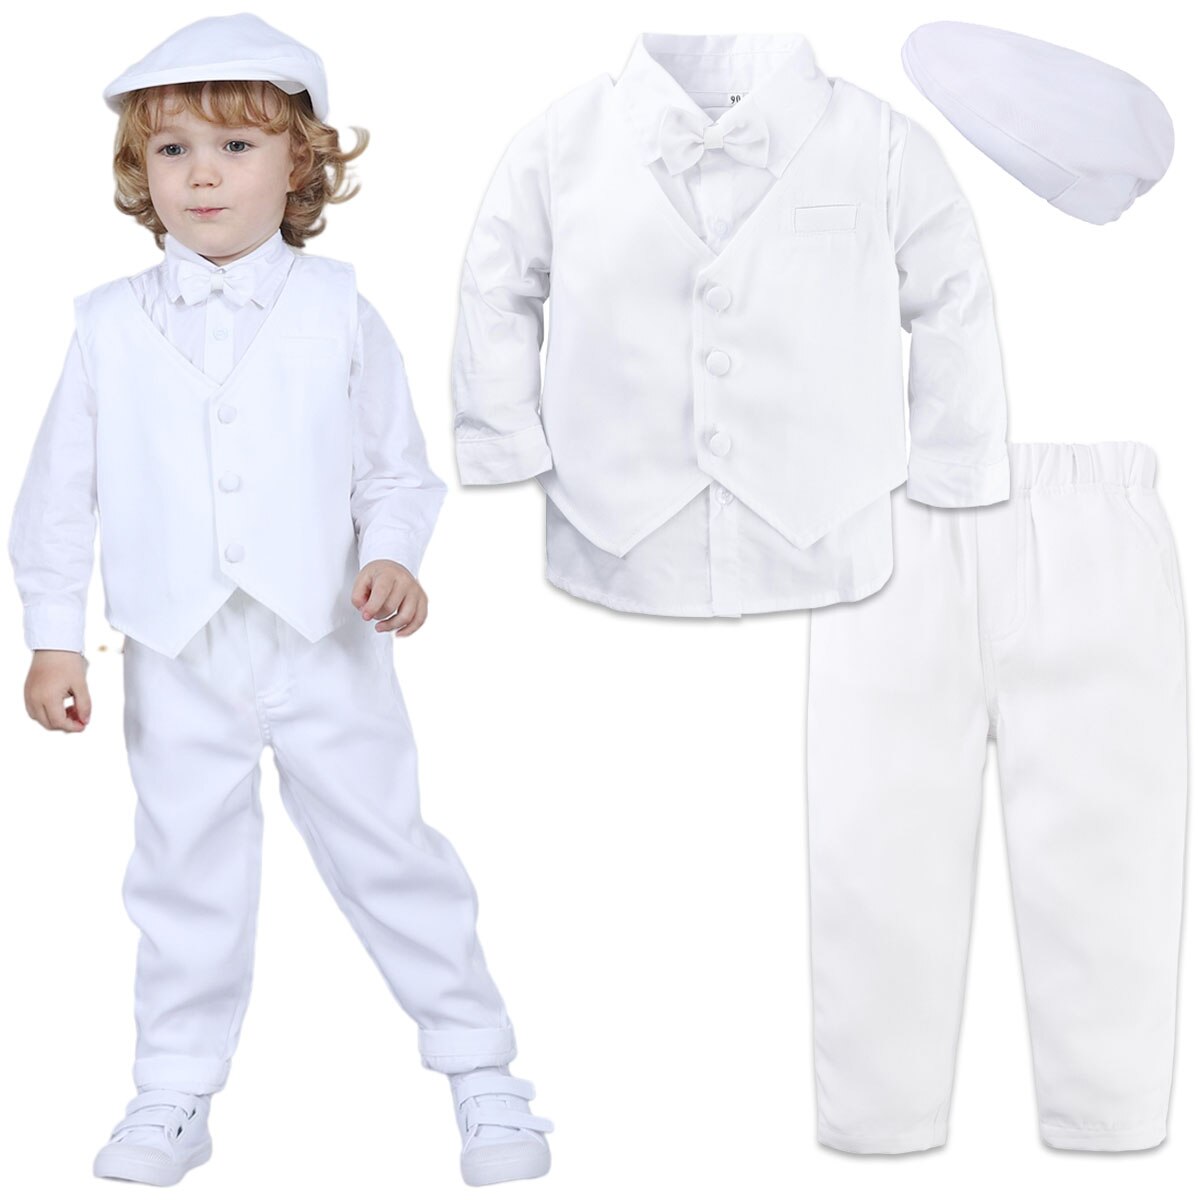 Baby Boy Baptism Formal Outfit Toddler Gentleman Party Clothing Set Infant Wedding Christmas Xmas Birthday Clothes Bow Tie